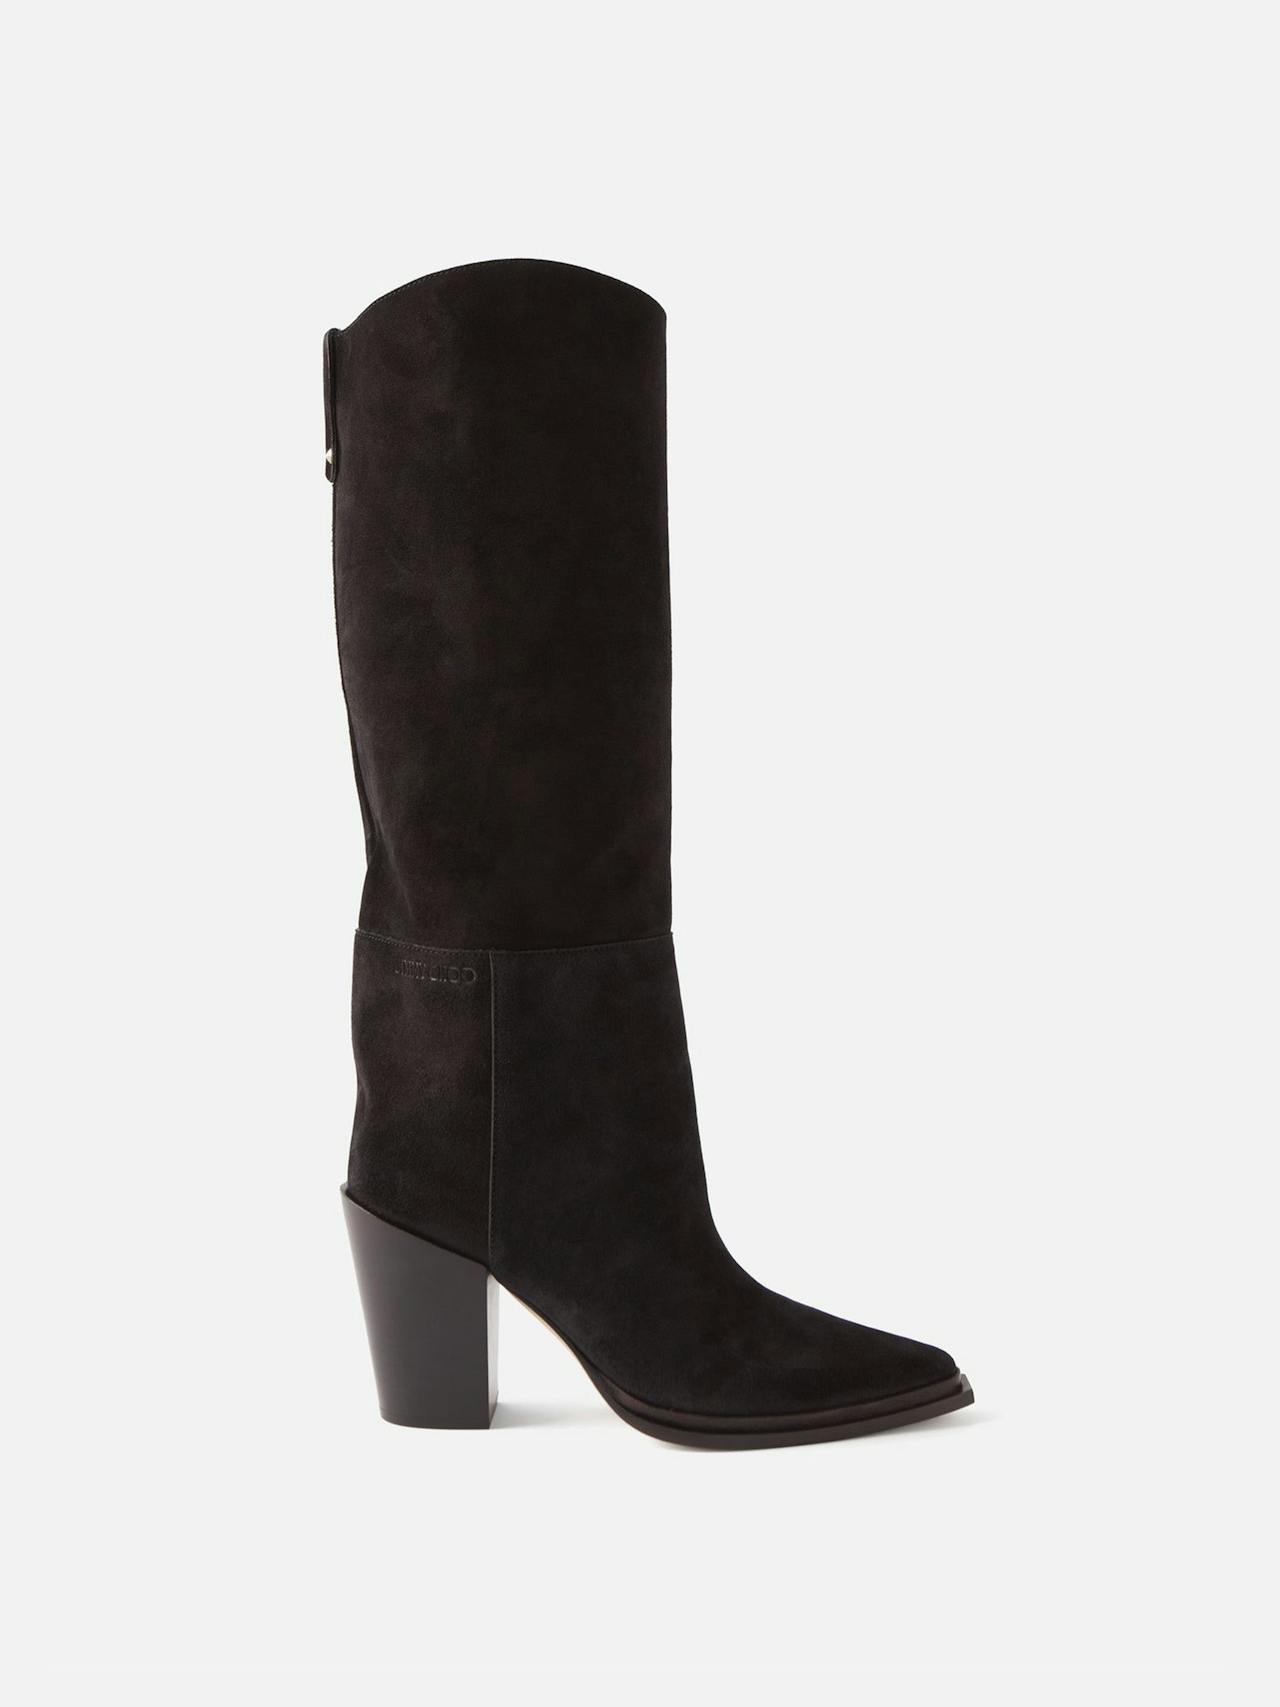 Cece suede knee-high boots